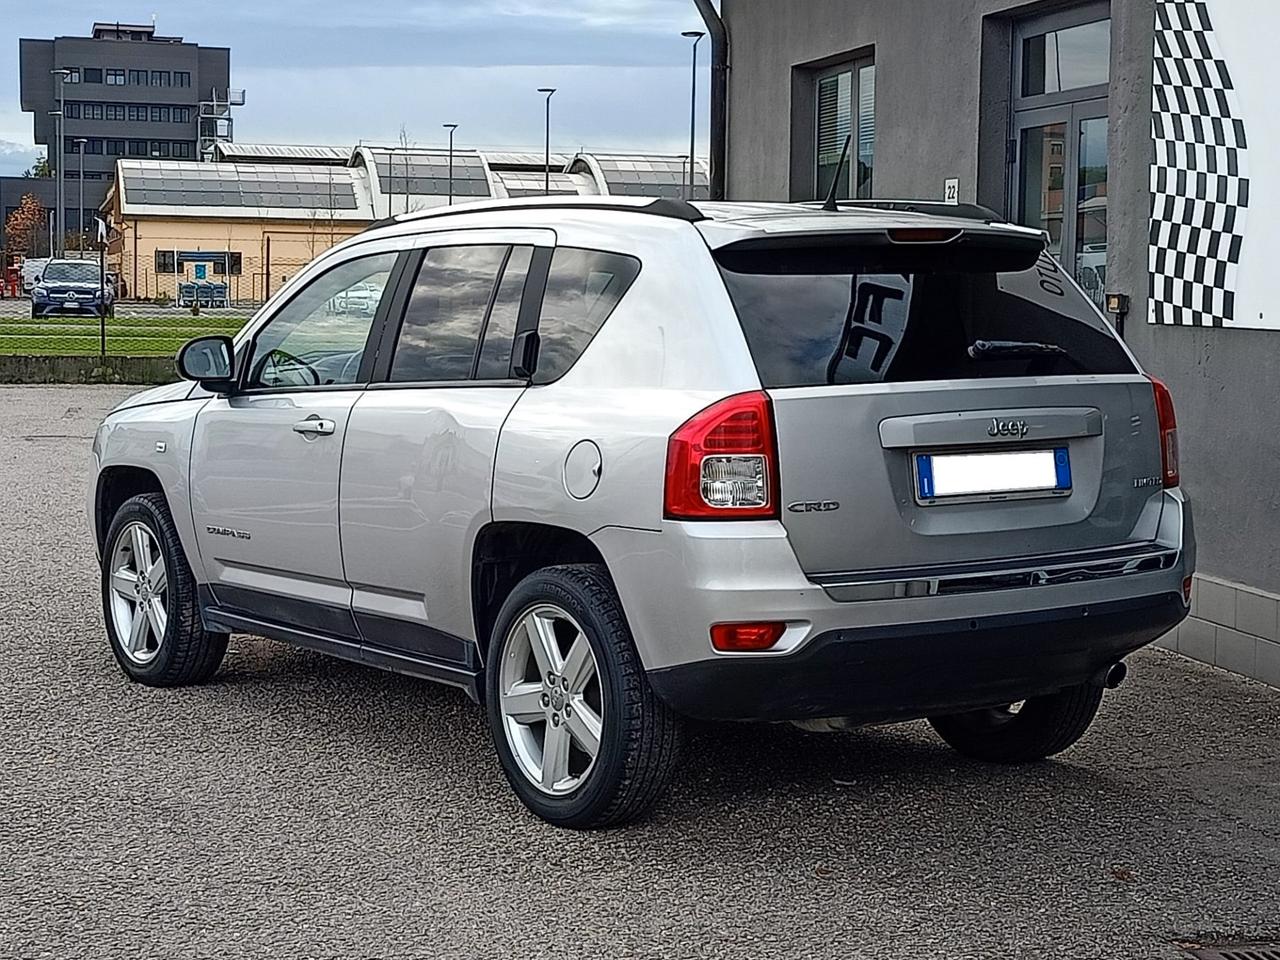 Jeep Compass 2.2 CRD Limited 4x4